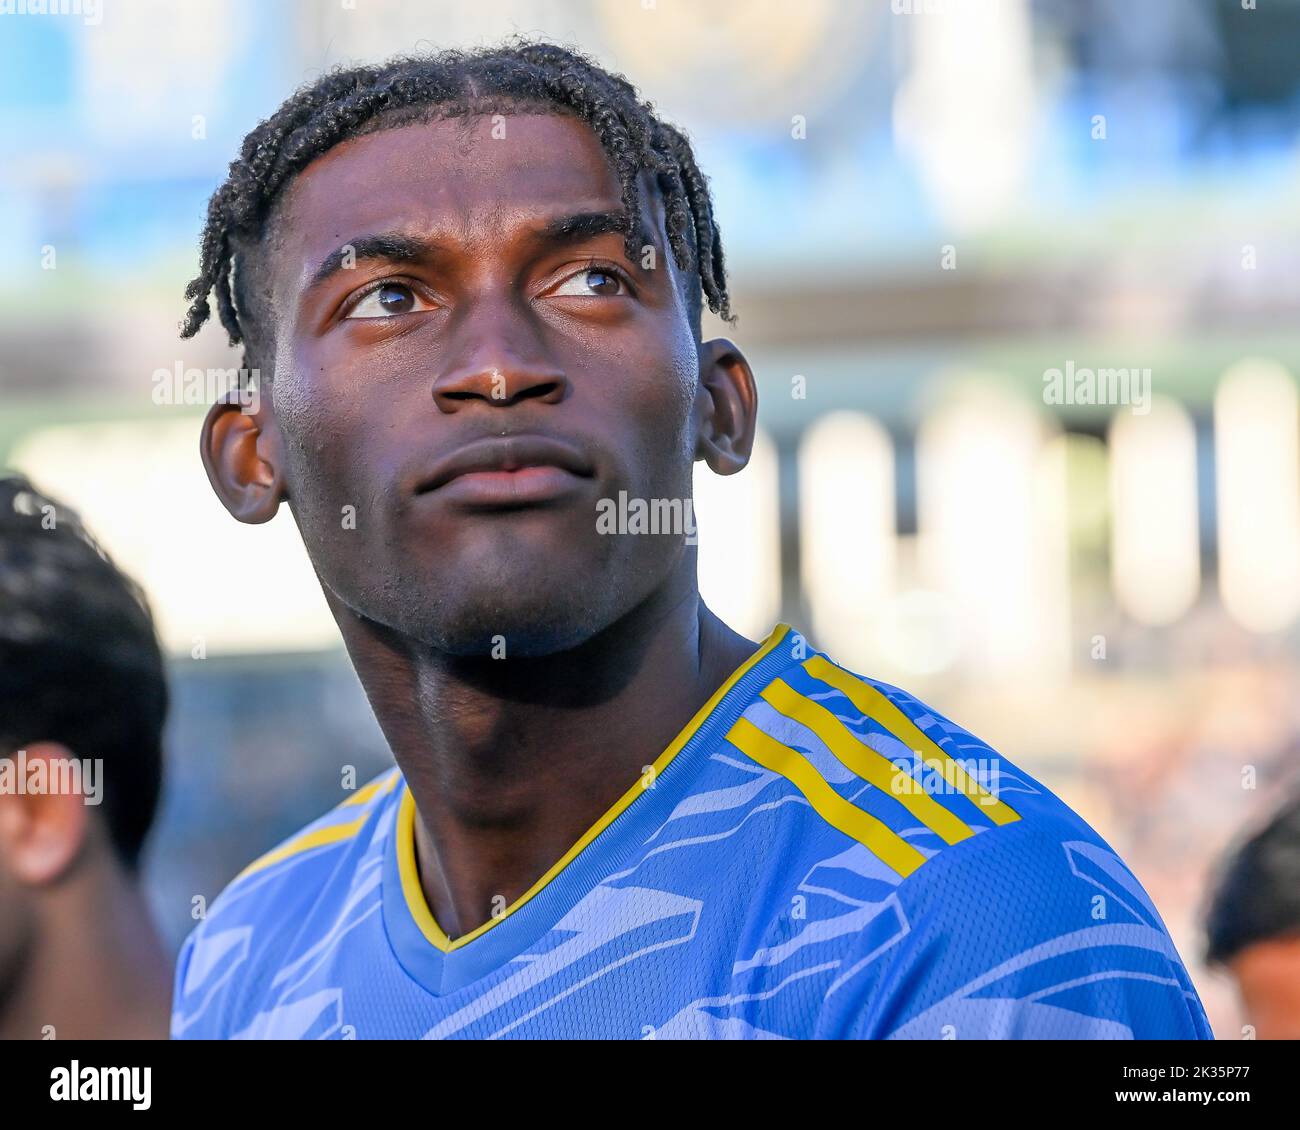 Chester, PA USA. 24th Sep - Philadelphia Union forward Nelson Pierre comes out on the field Photo by Don Mennig - Alamy Live News Stock Photo